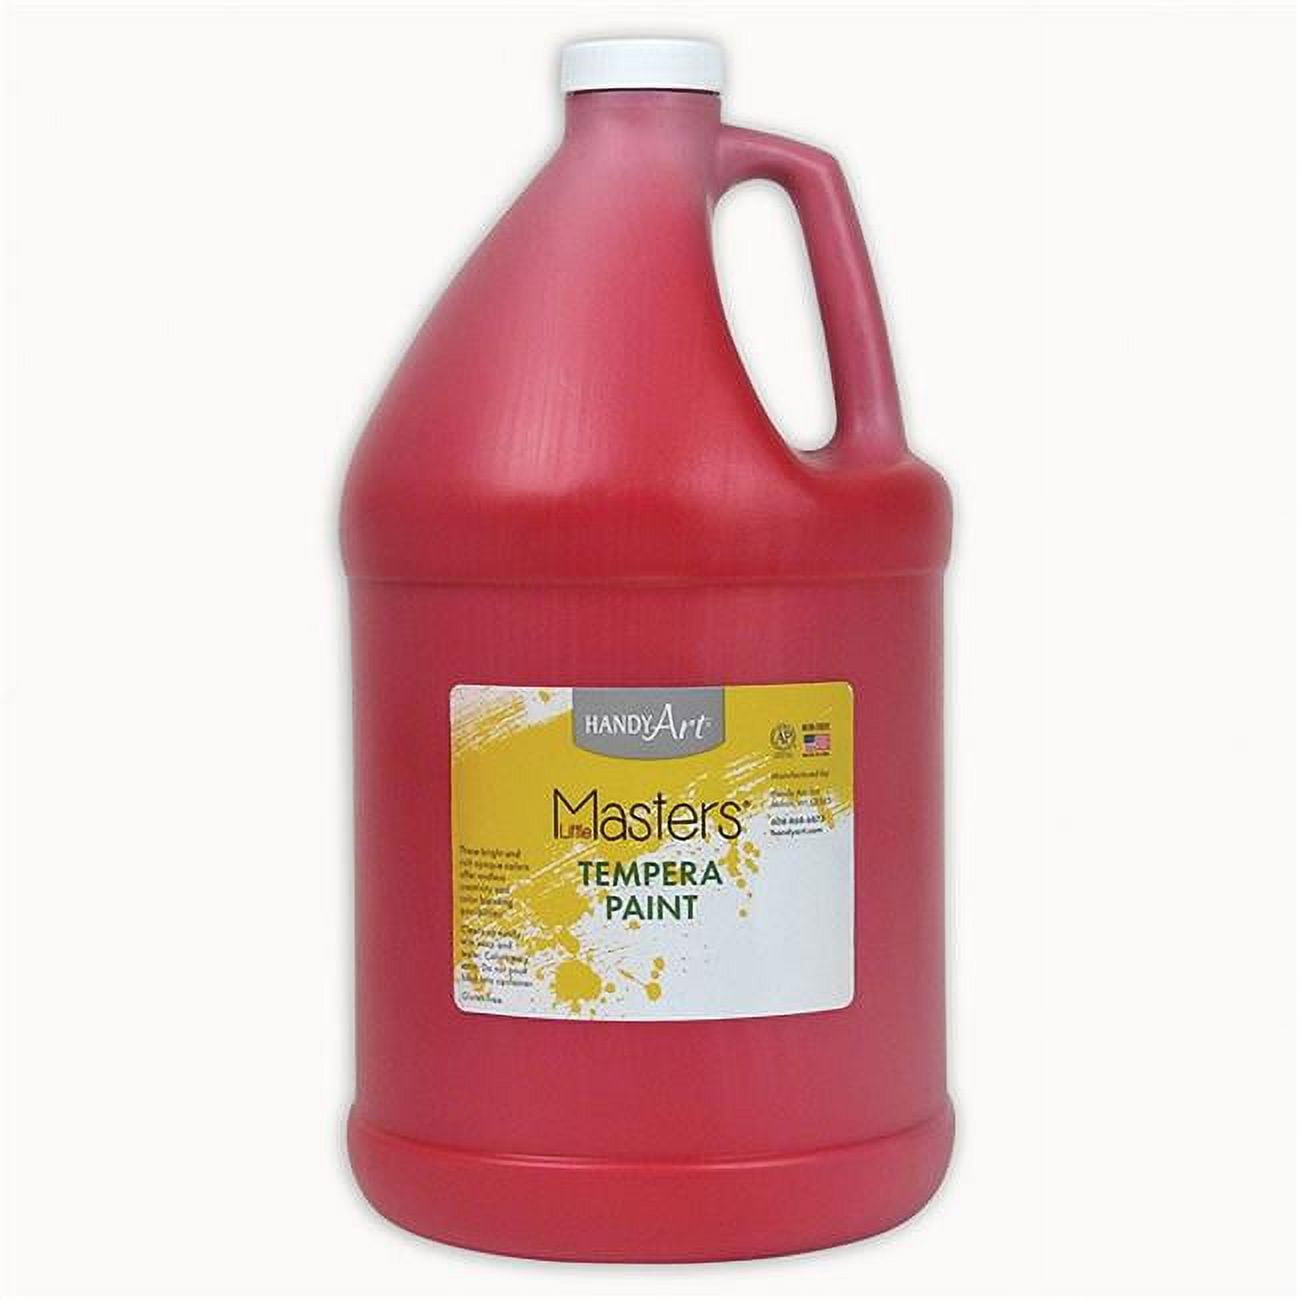 Colorations® 1/2 Gallon White Simply Washable Tempera Paint